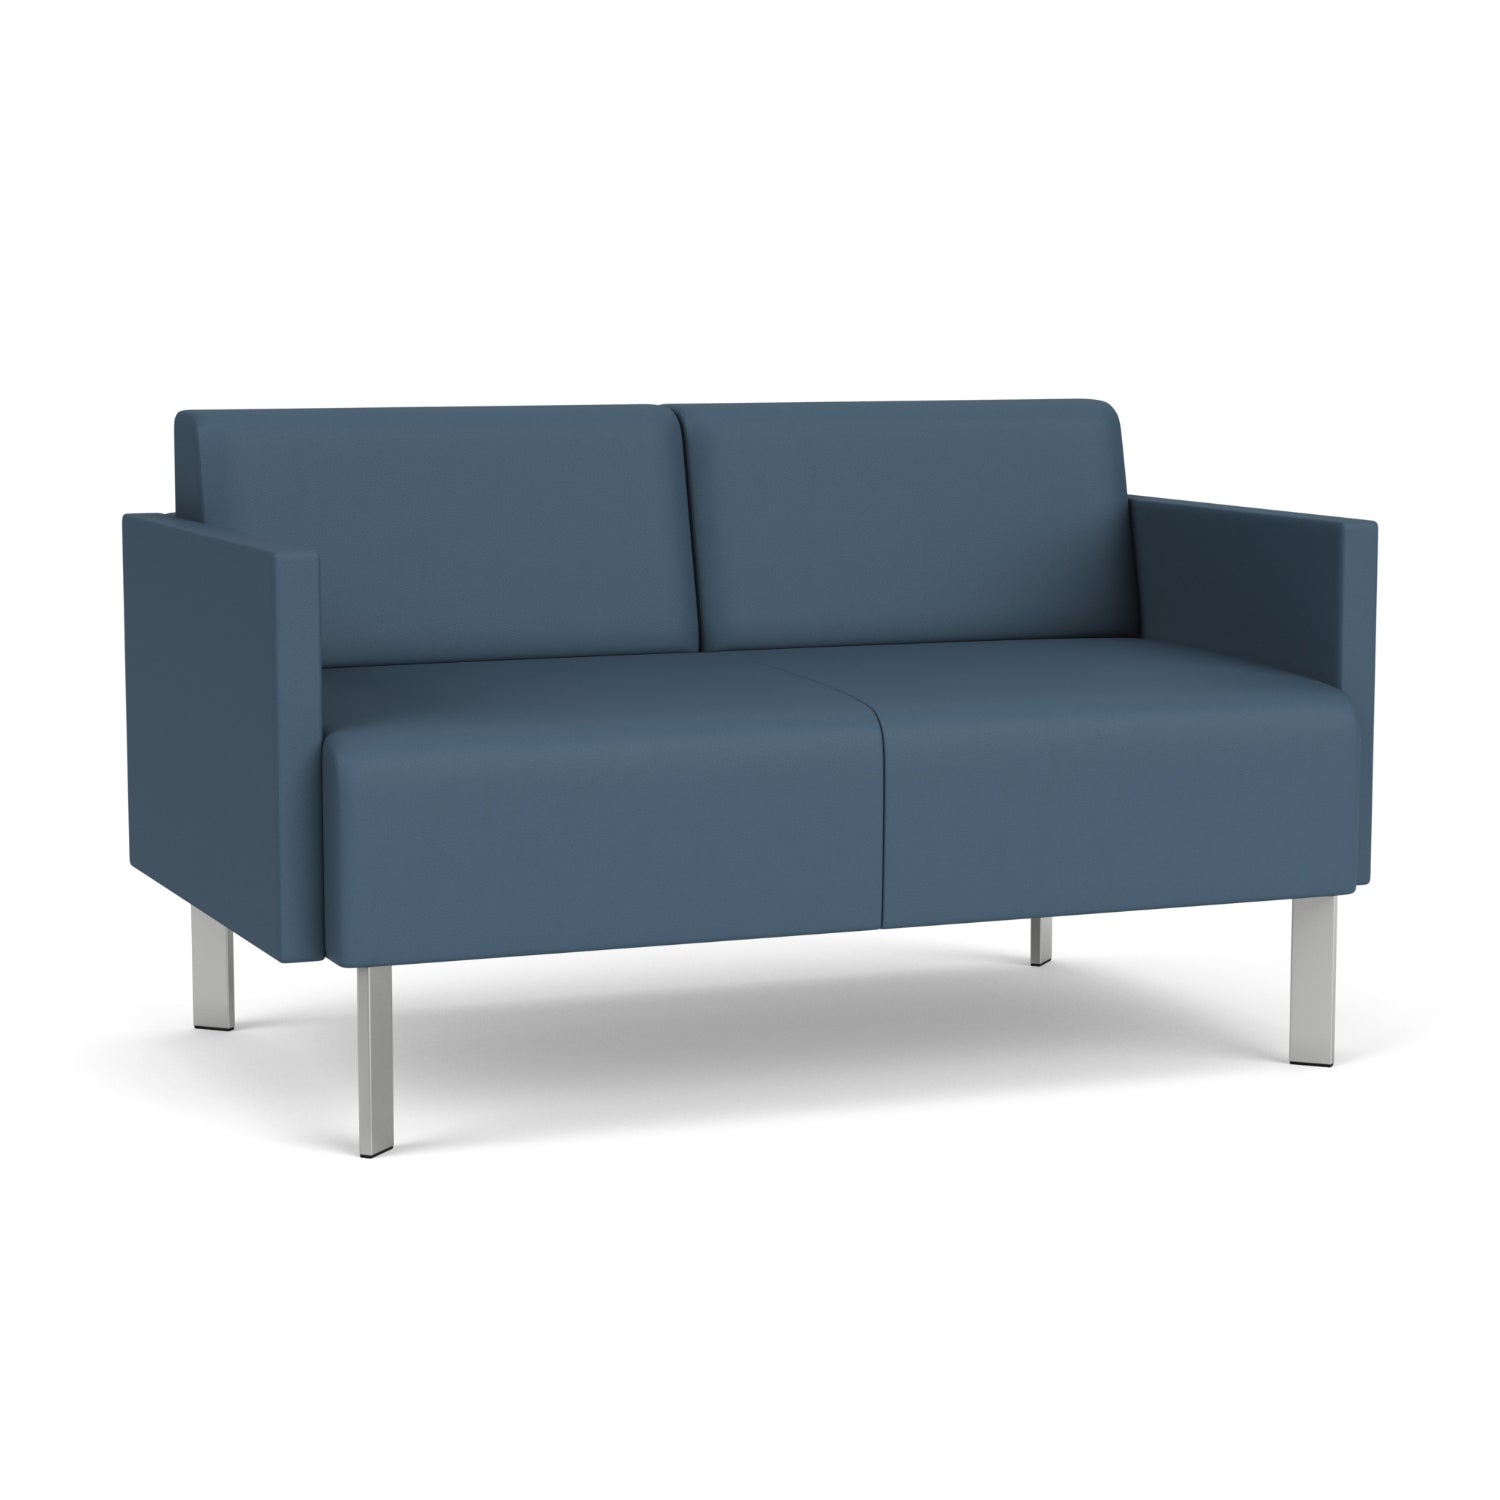 Luxe Collection Reception Seating, Loveseat, Standard Vinyl Upholstery, FREE SHIPPING